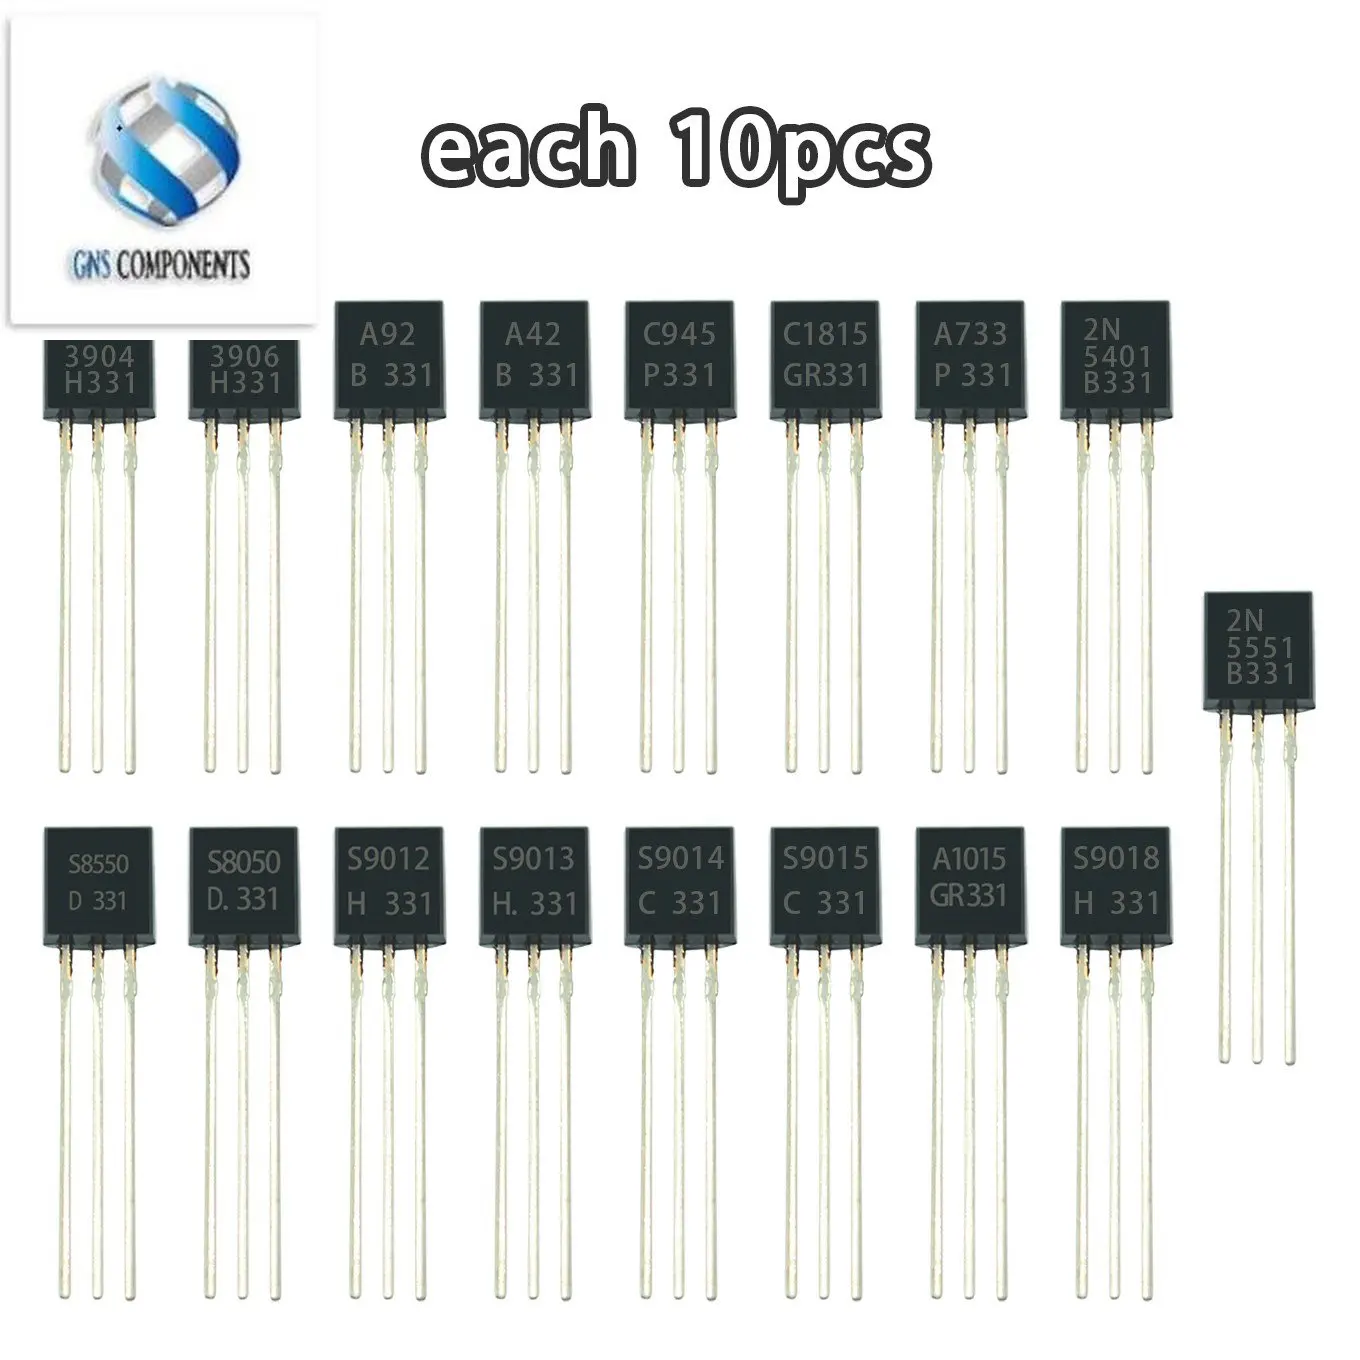 

170pcs/pack Triode Transistor Assorted Kit 17Vvalues*10pcs TO-92 S9012 S9013 S9014 S9015 S9018 A1015 C1815A42 A922 N5401 2N5551